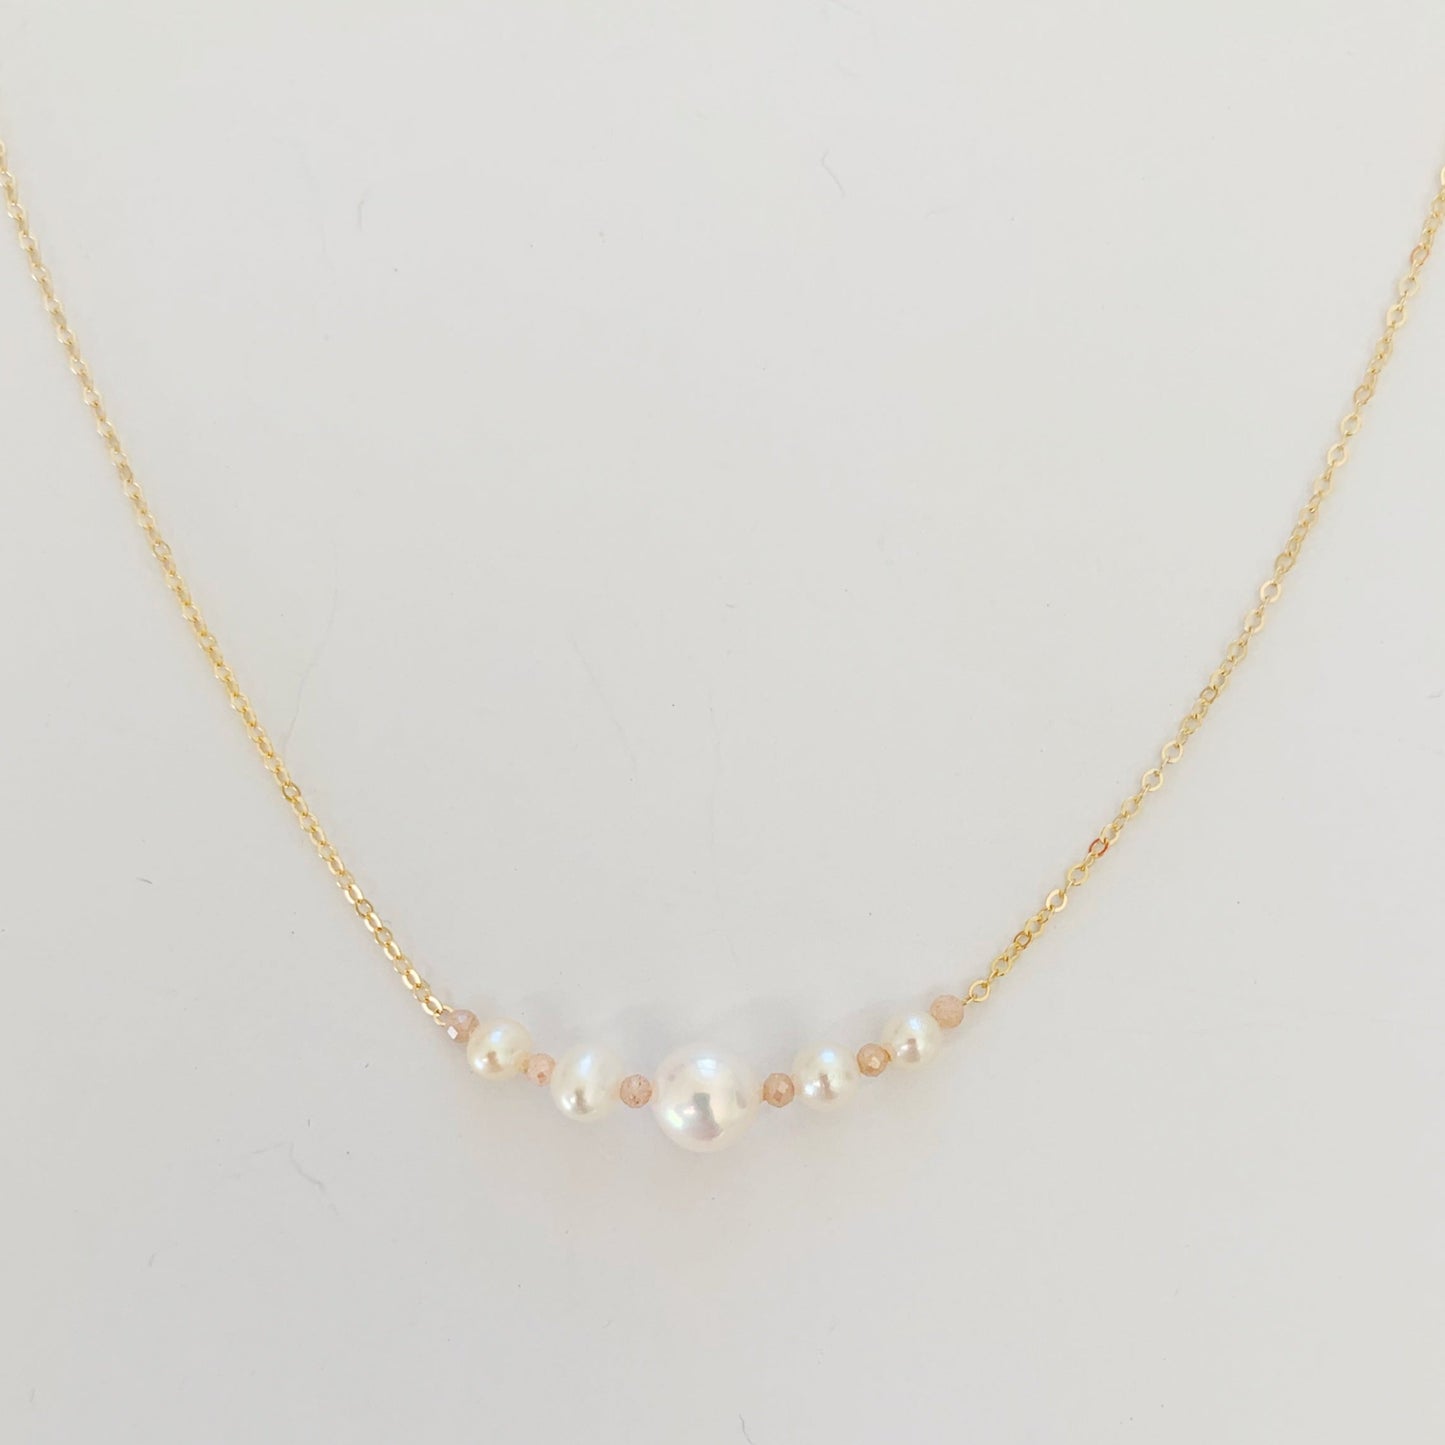 The barrington necklace by mermaids and madeleines has graduated freshwater pearls at the center with peach moonstone on 14k gold filled chain. this necklace is photographed close up and on a white surface